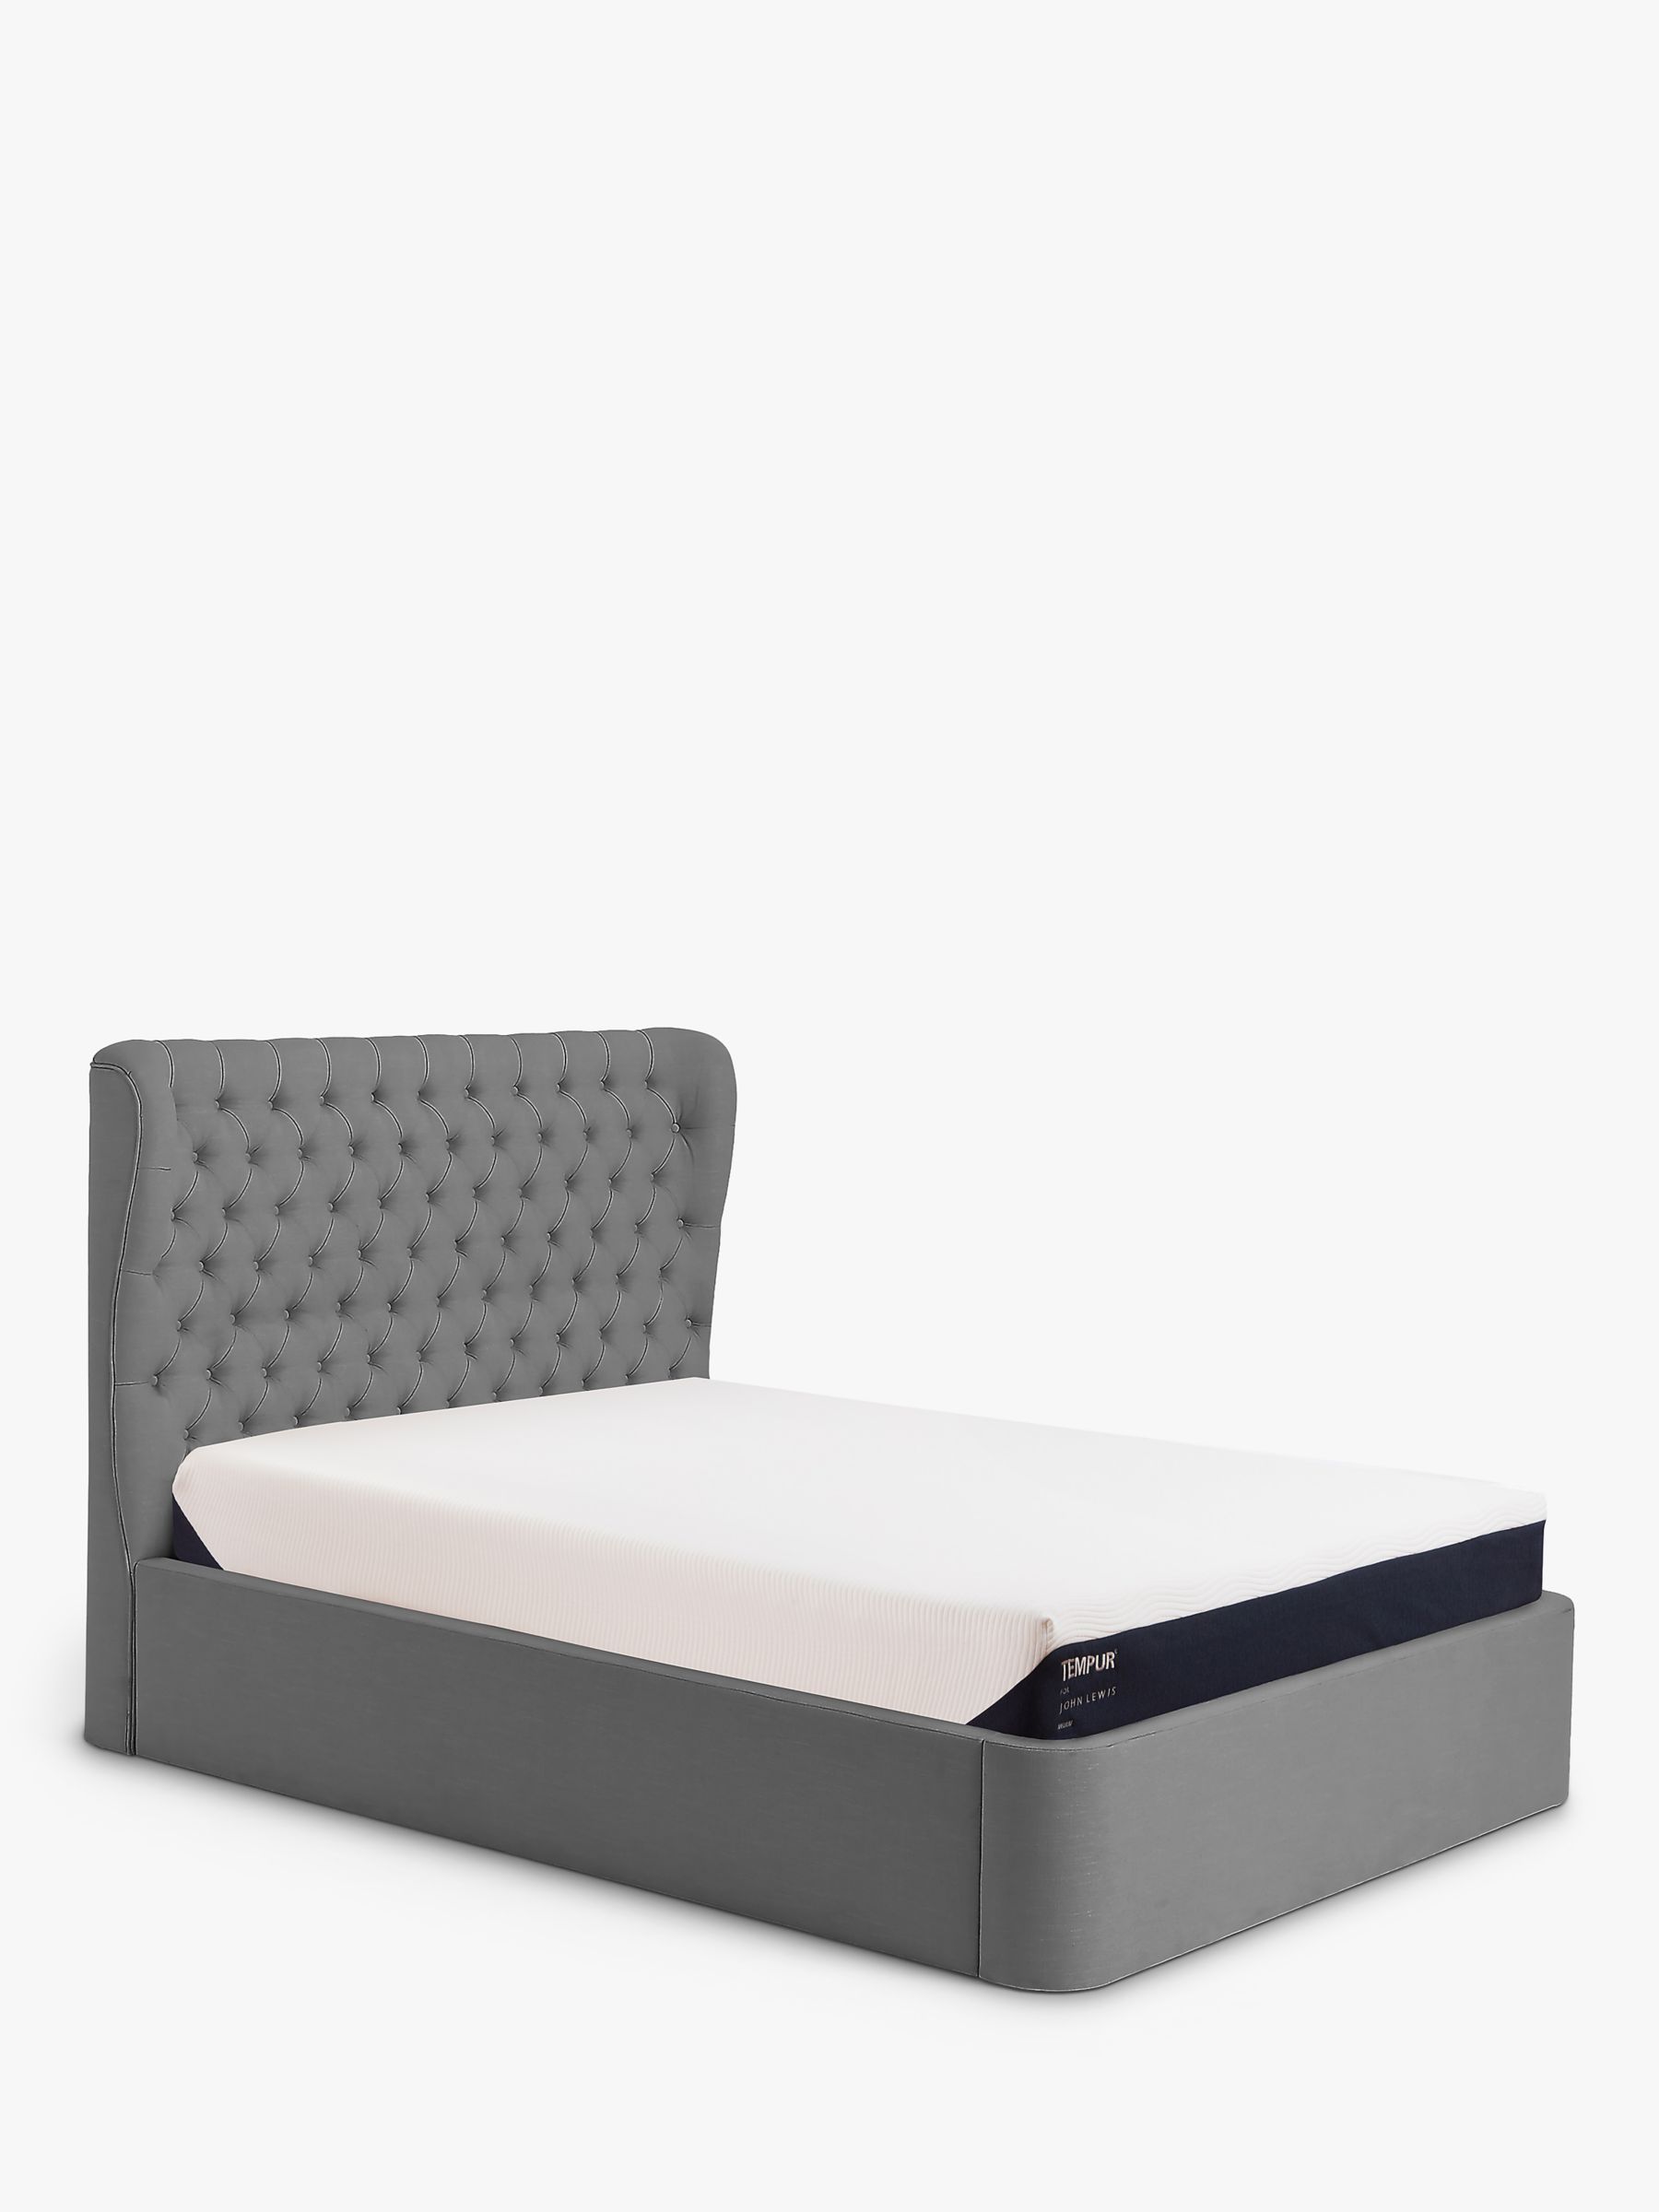 Photo of Tempur® button ottoman storage upholstered bed frame super king size